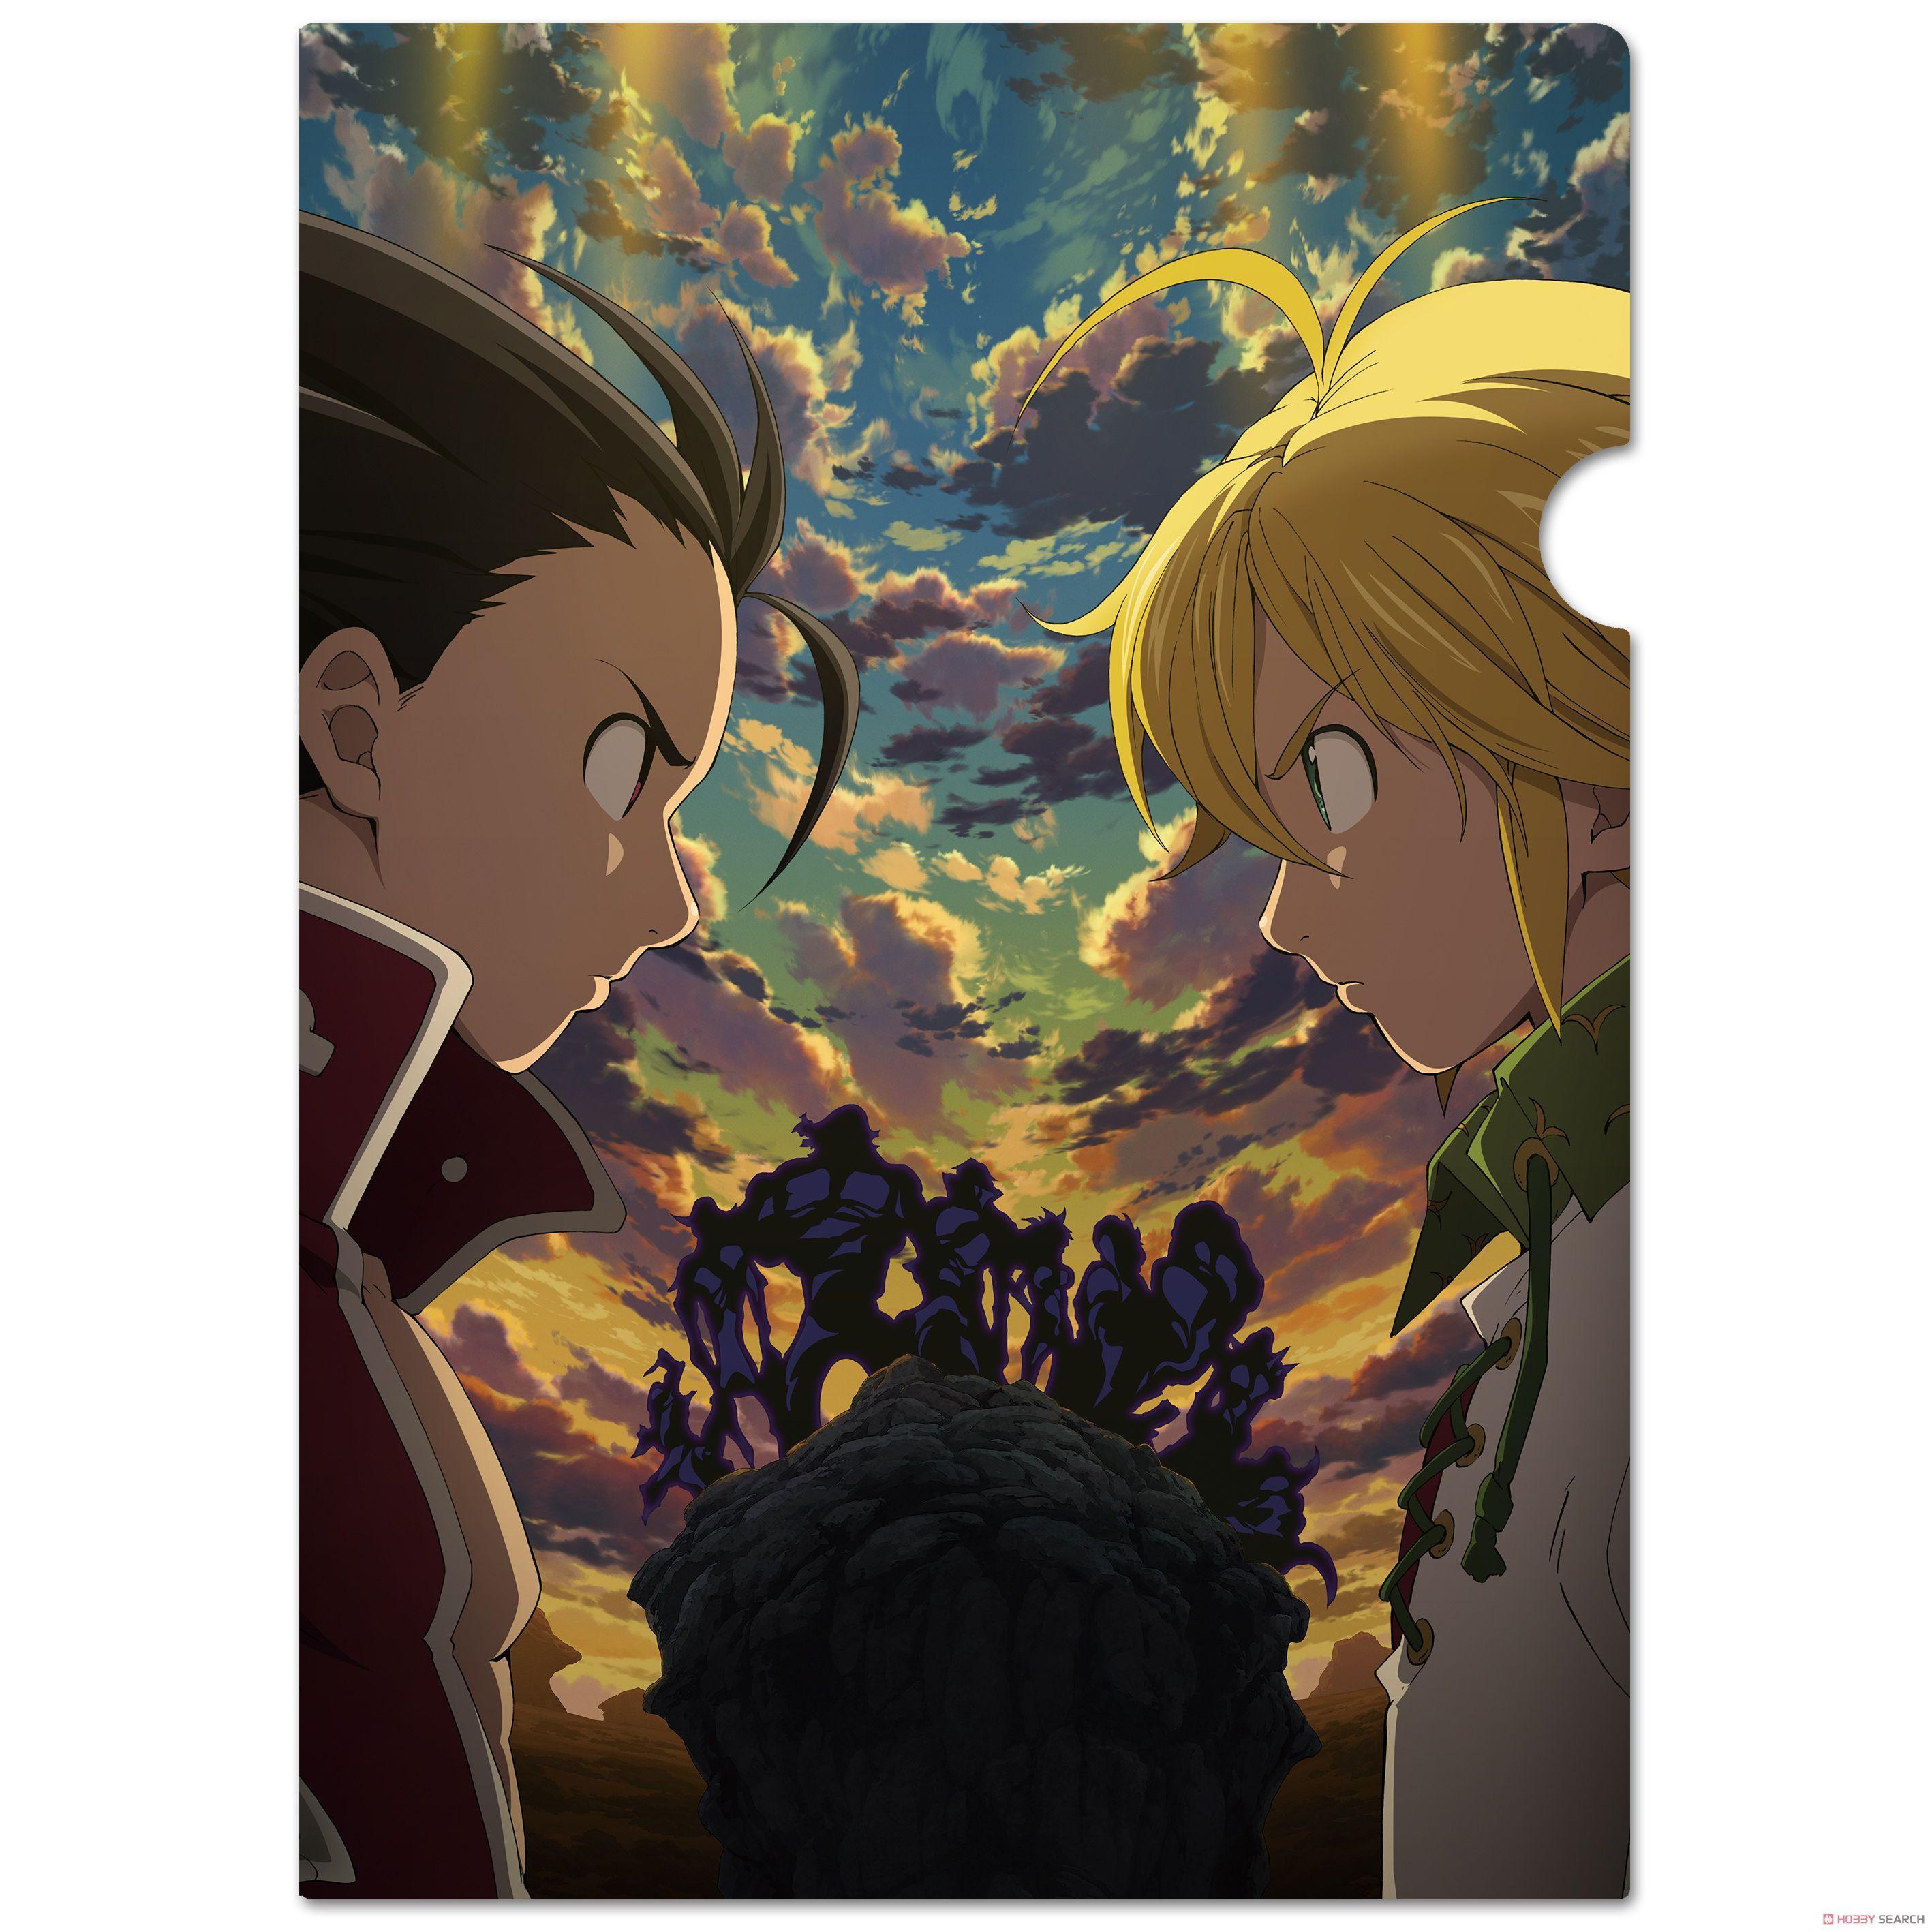 The Seven Deadly Sins Revival Of The Commandments Free 4K Wallpapers, The Seven Deadly Sins Revival Of The Commandments, Anime